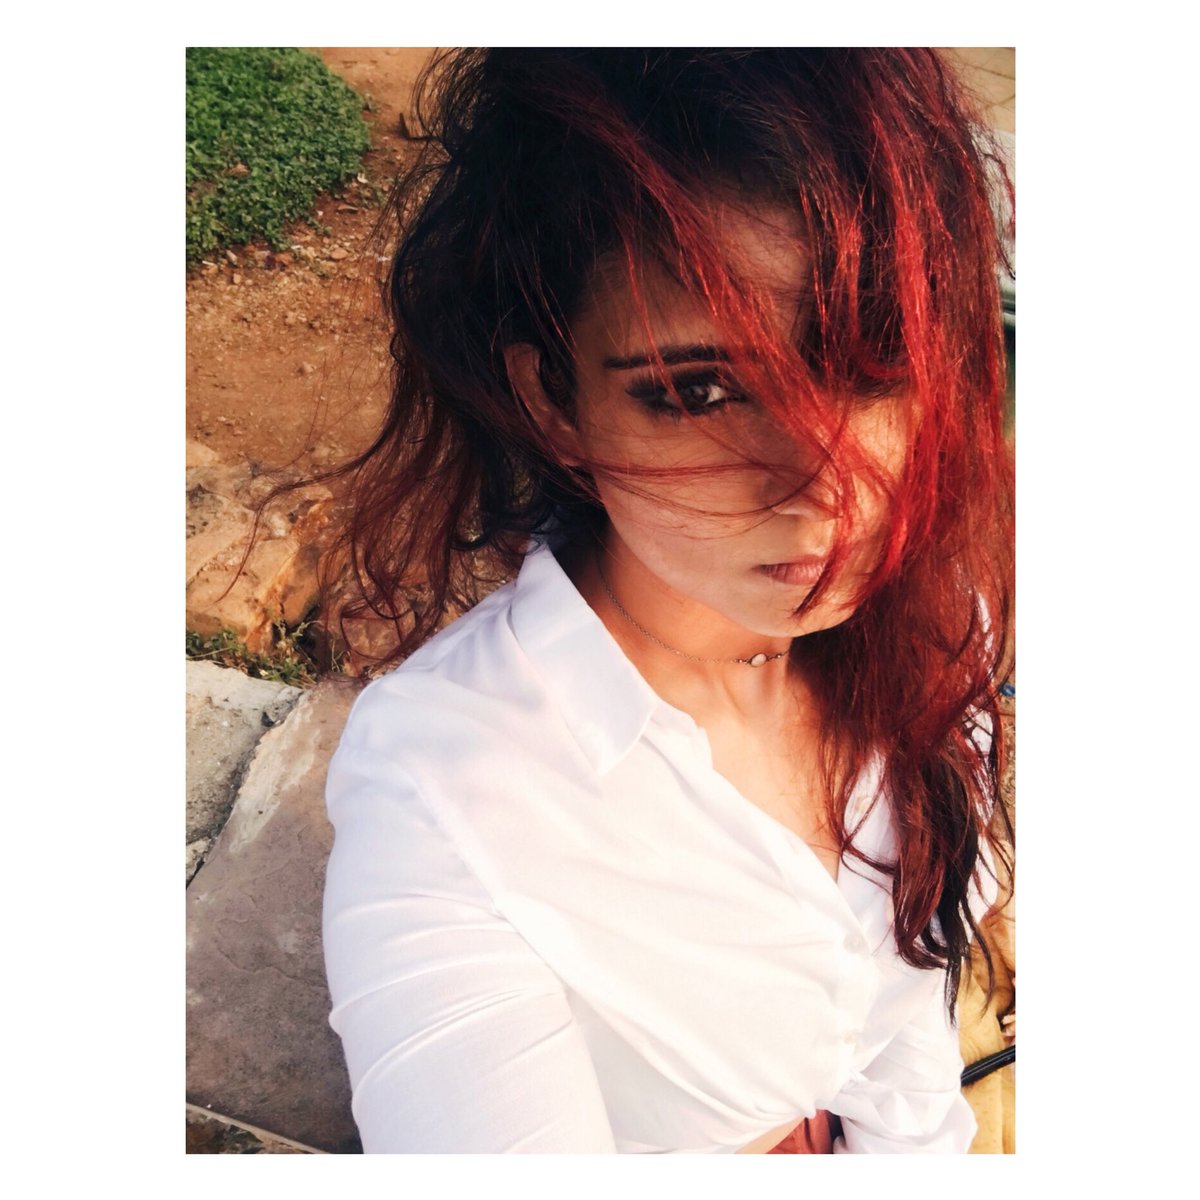 Sun-kissed hair 💛✨✨ #blogmyway 
.
.
.
.
.
 #earthofficial #earthfocus #artofvisuals #nature_perfection #earth_deluxe #natureaddict #awesomeearth #welivetoexplore #planetdiscovery #unlimitedplanet #nature_wizards #naturegeography #natureonly #nature_brilliance #naturelover